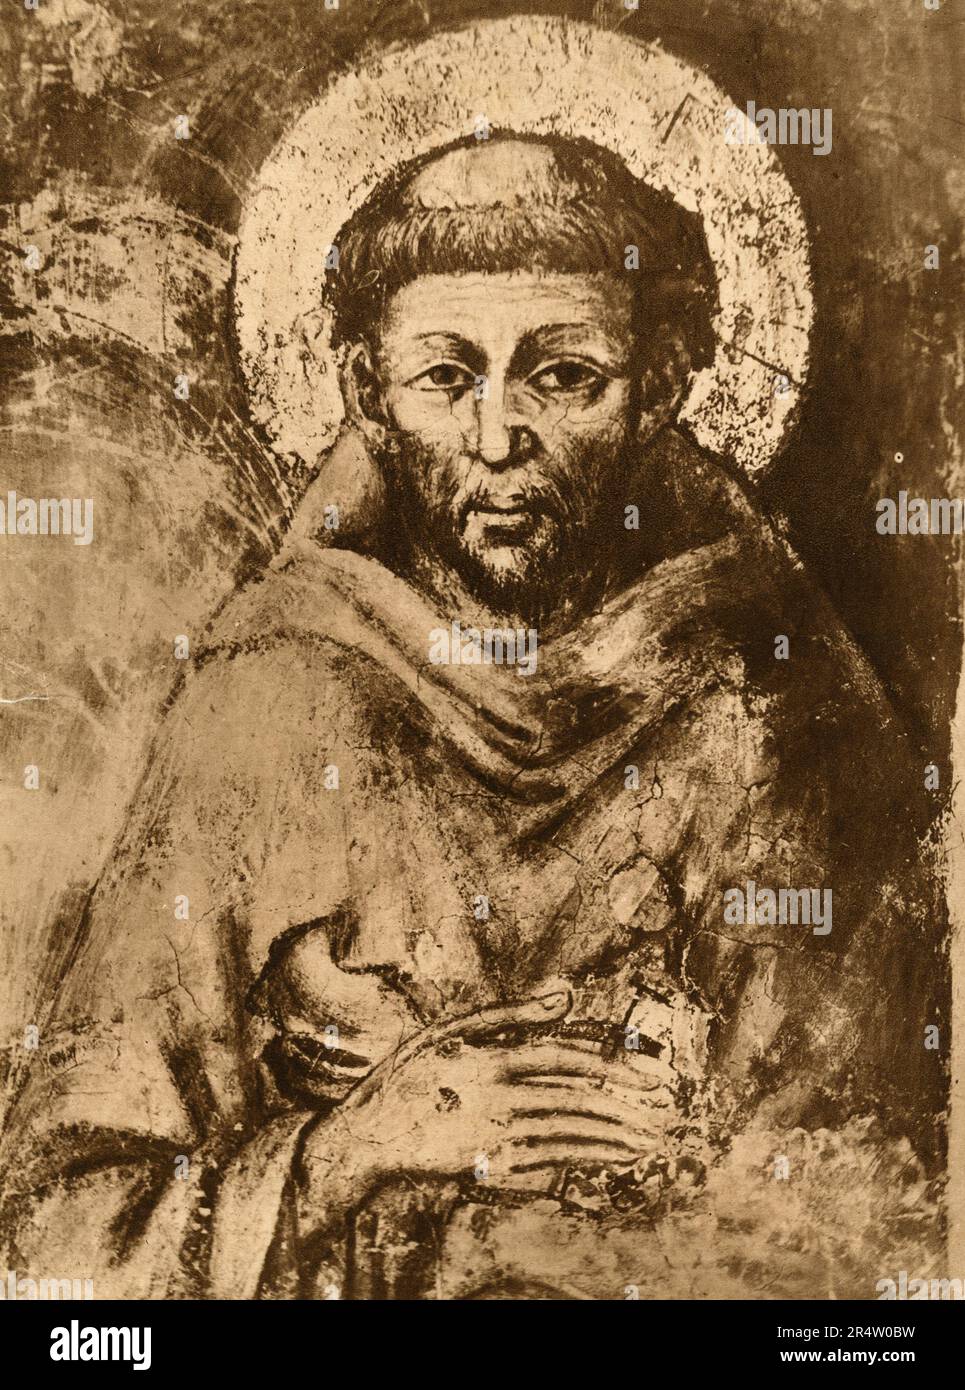 Saint Francis, painting by Italian artist Cimabue, Inferior church, Assisi, Italy 1920s Stock Photo